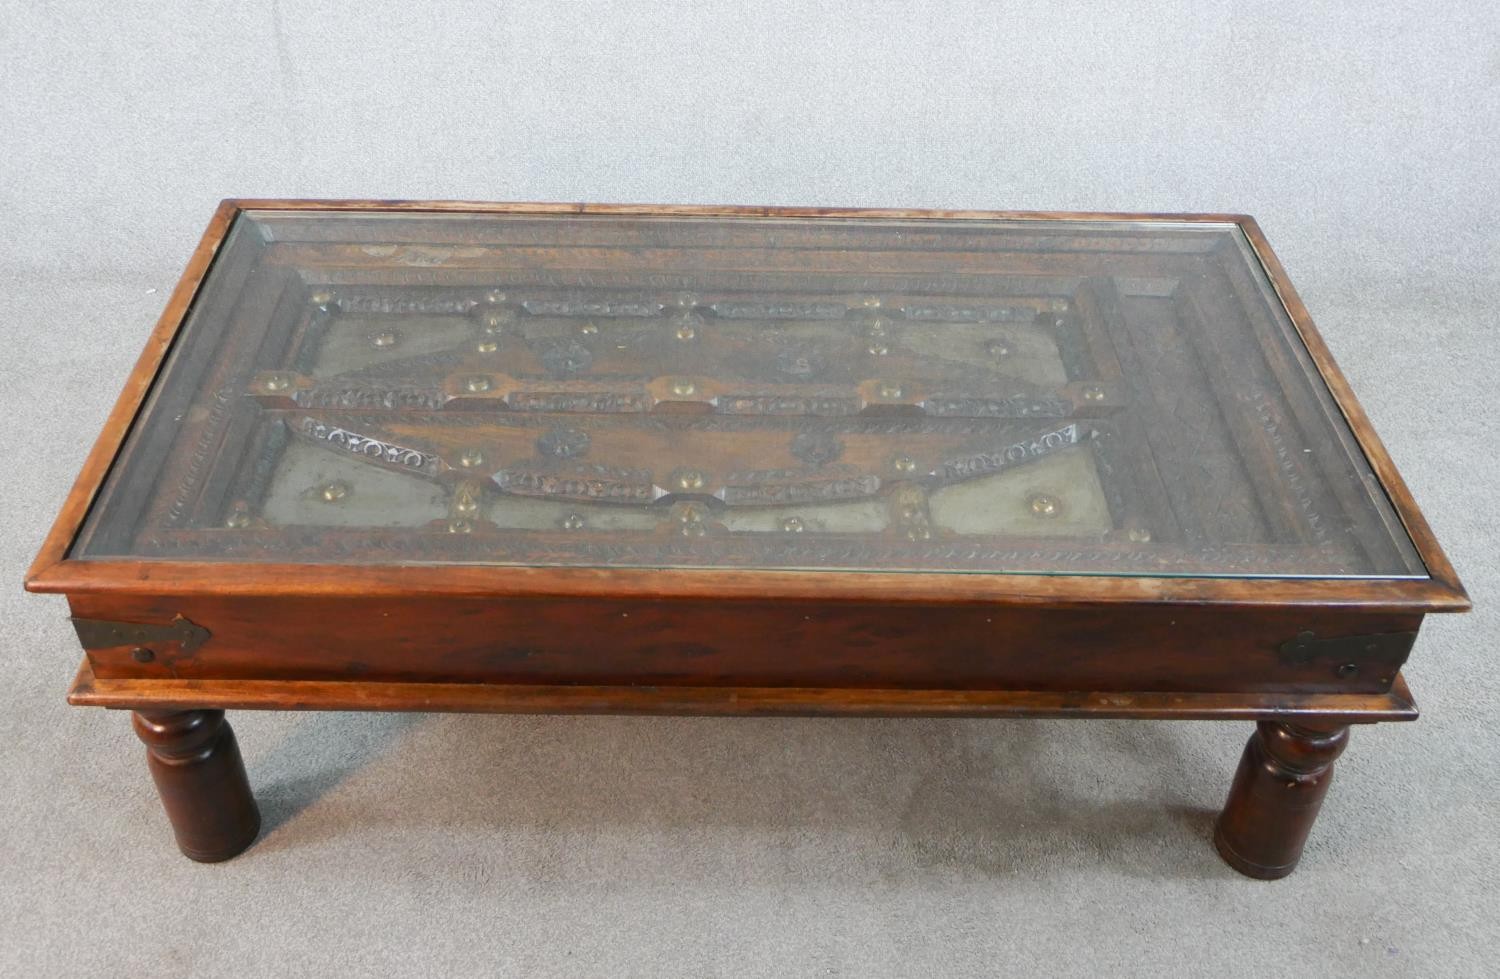 A 20th century carved hardwood, possibly African 'shield' inset rectangular glass topped coffee